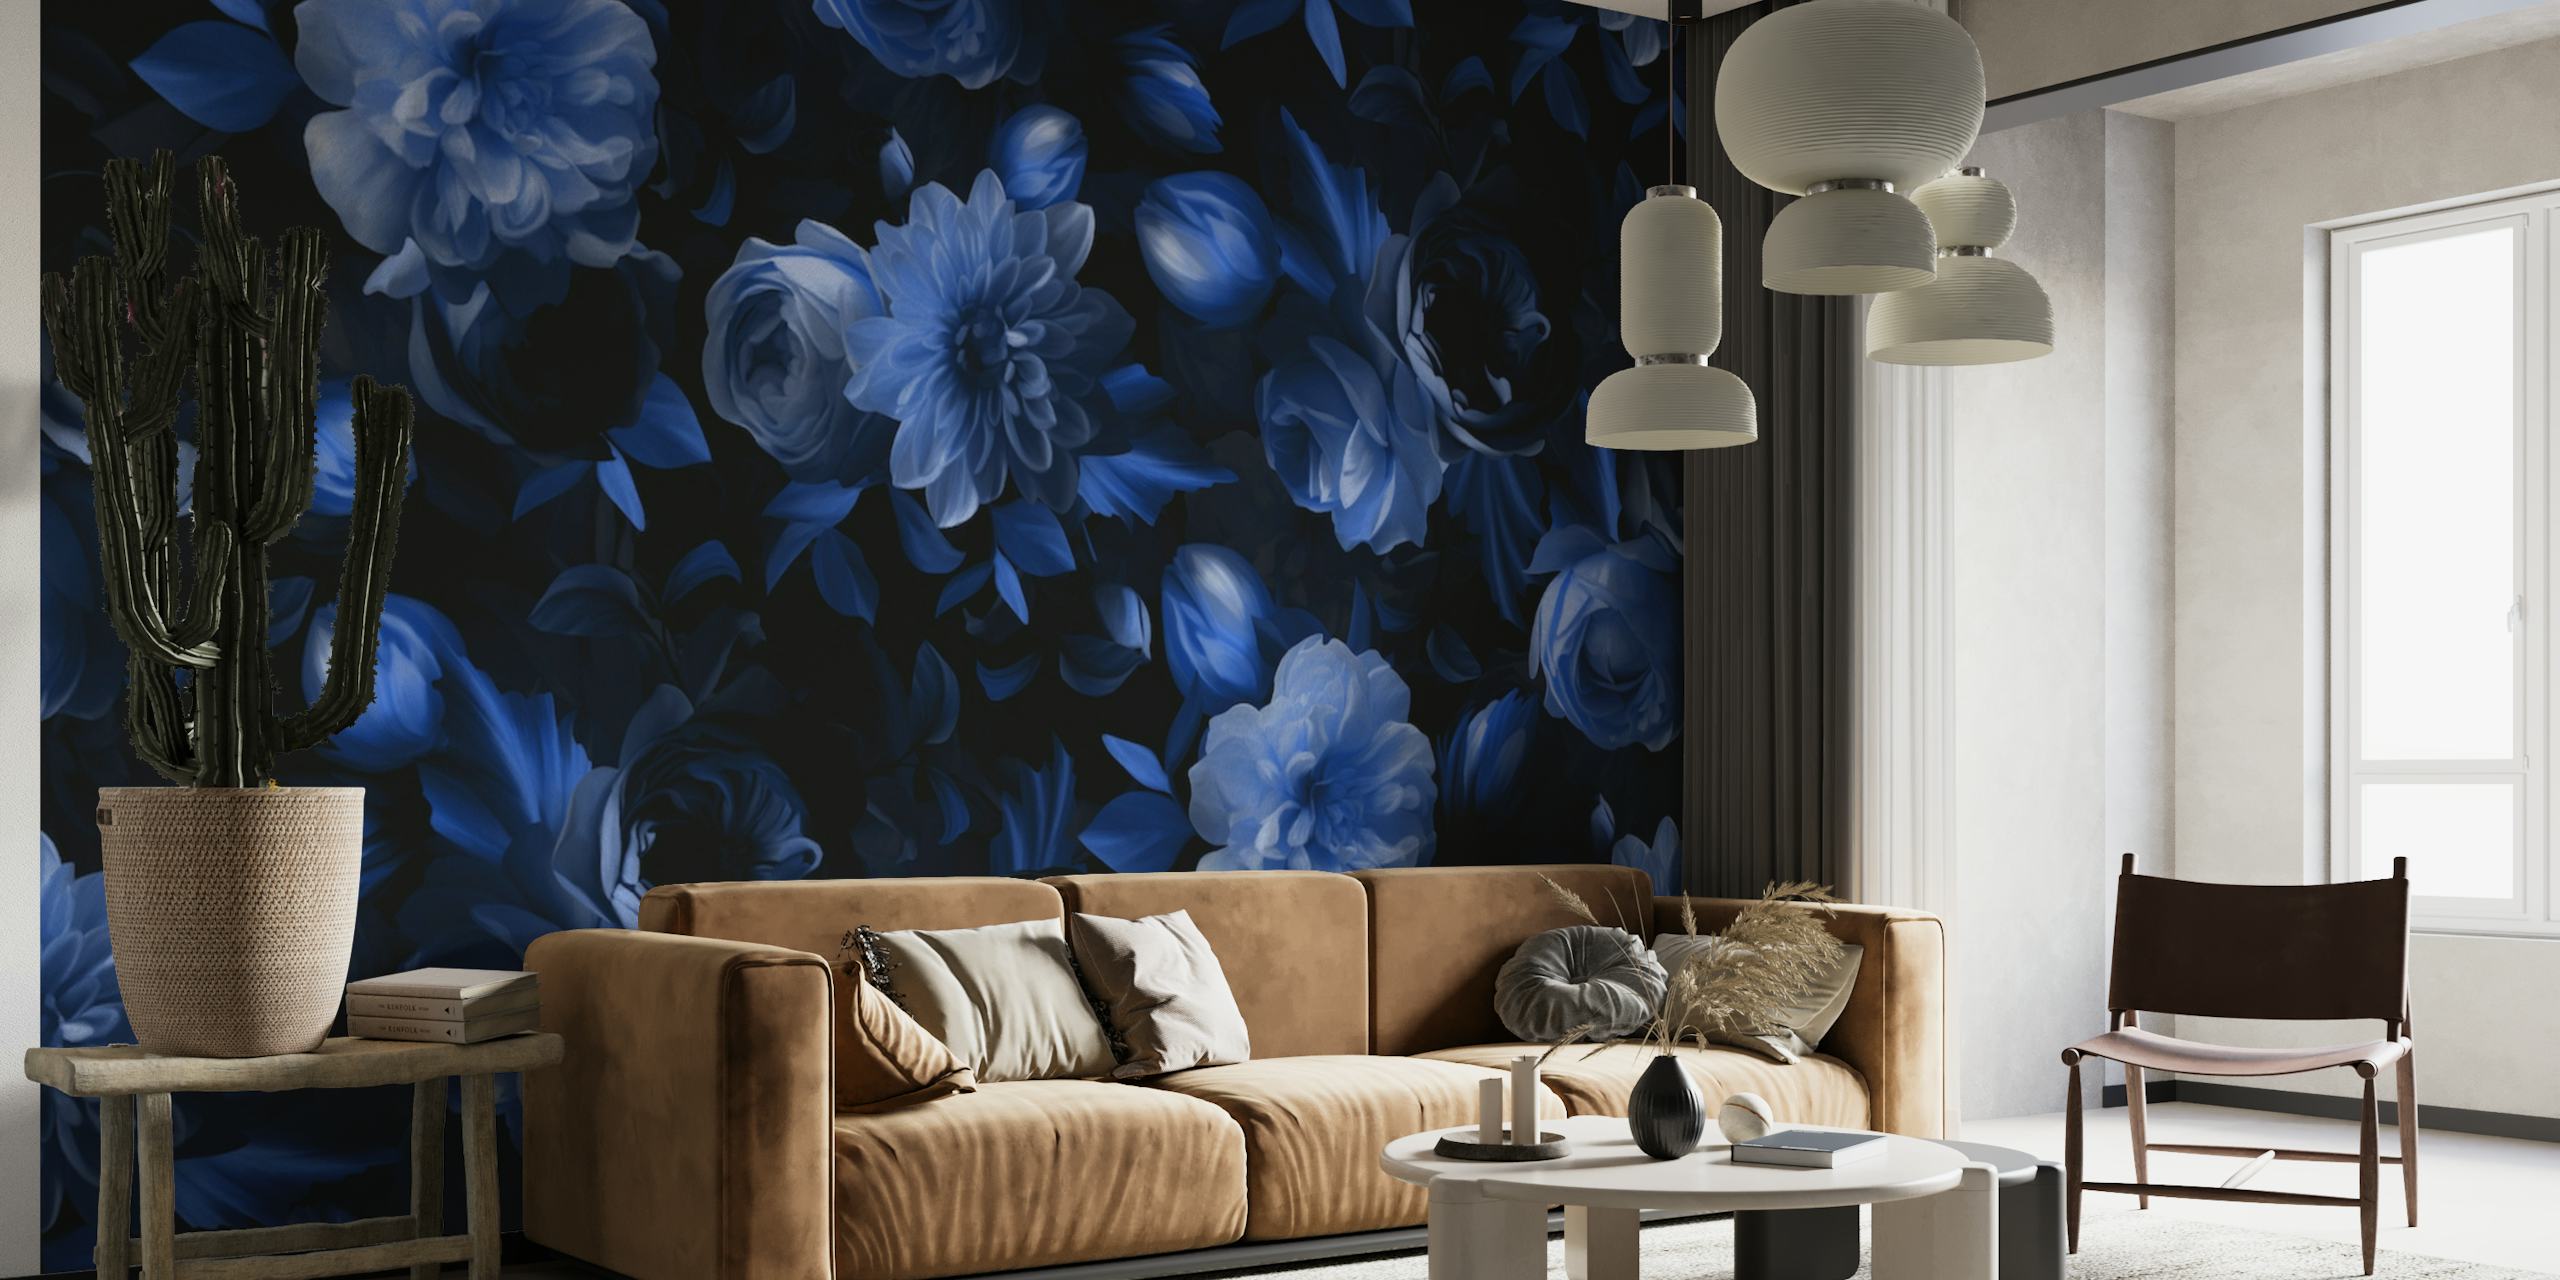 Elegant midnight blue floral pattern wall mural with baroque-inspired design.